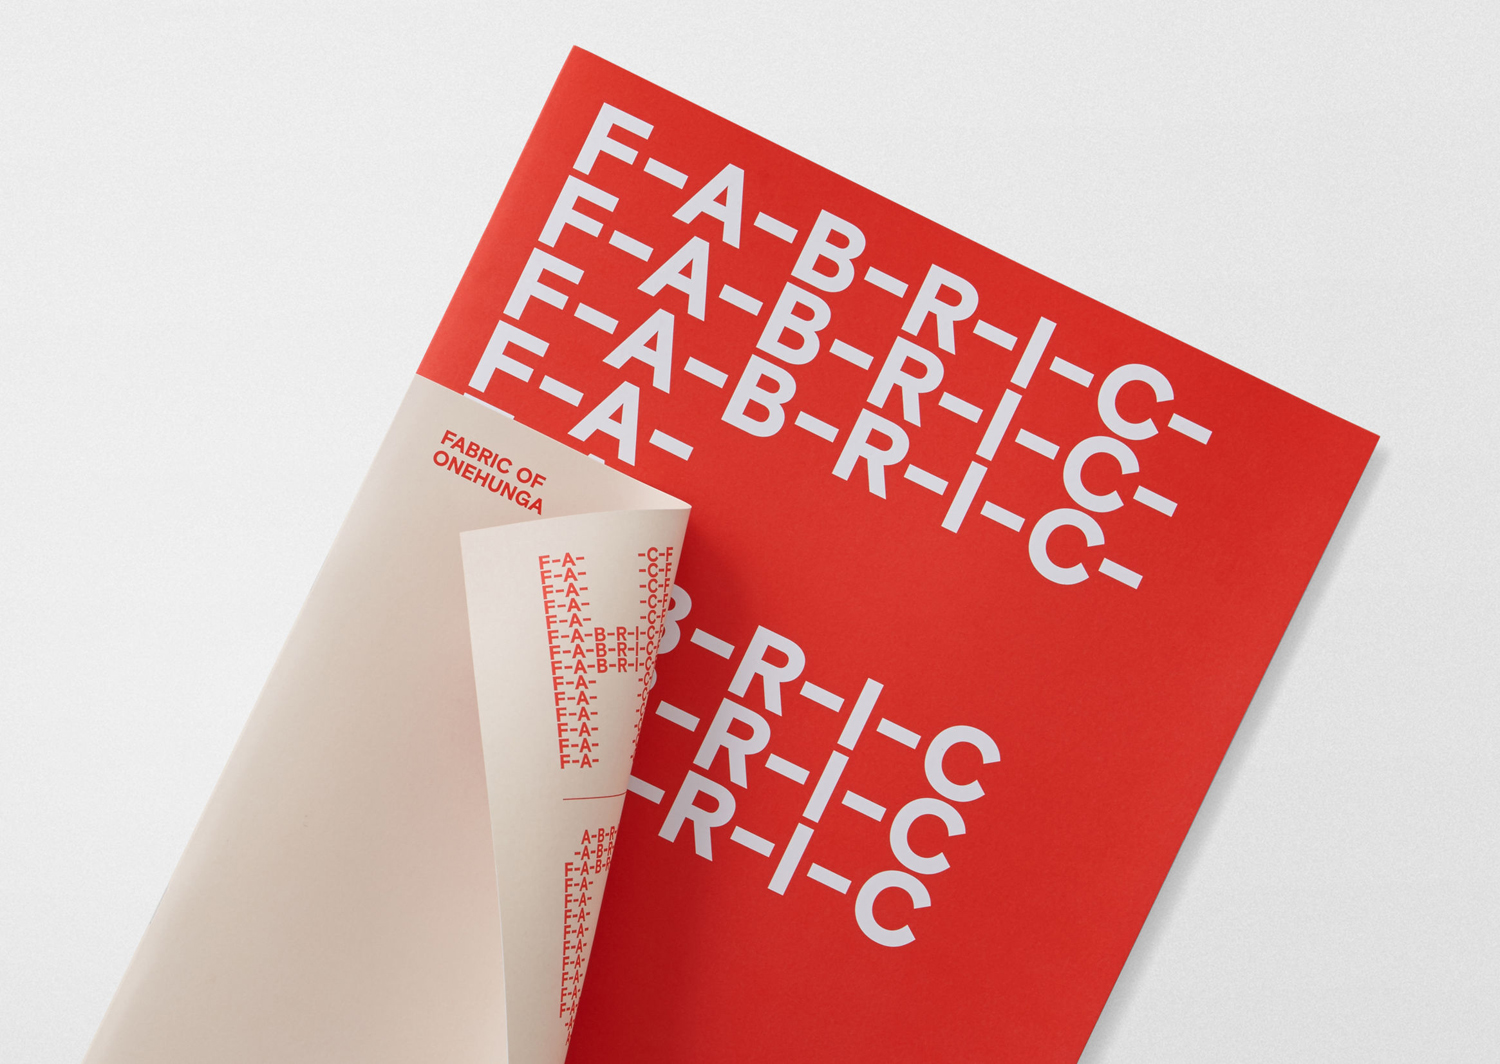 Brand identity and brochure by Richards Partners for Auckland residential development Fabric of Onehunga